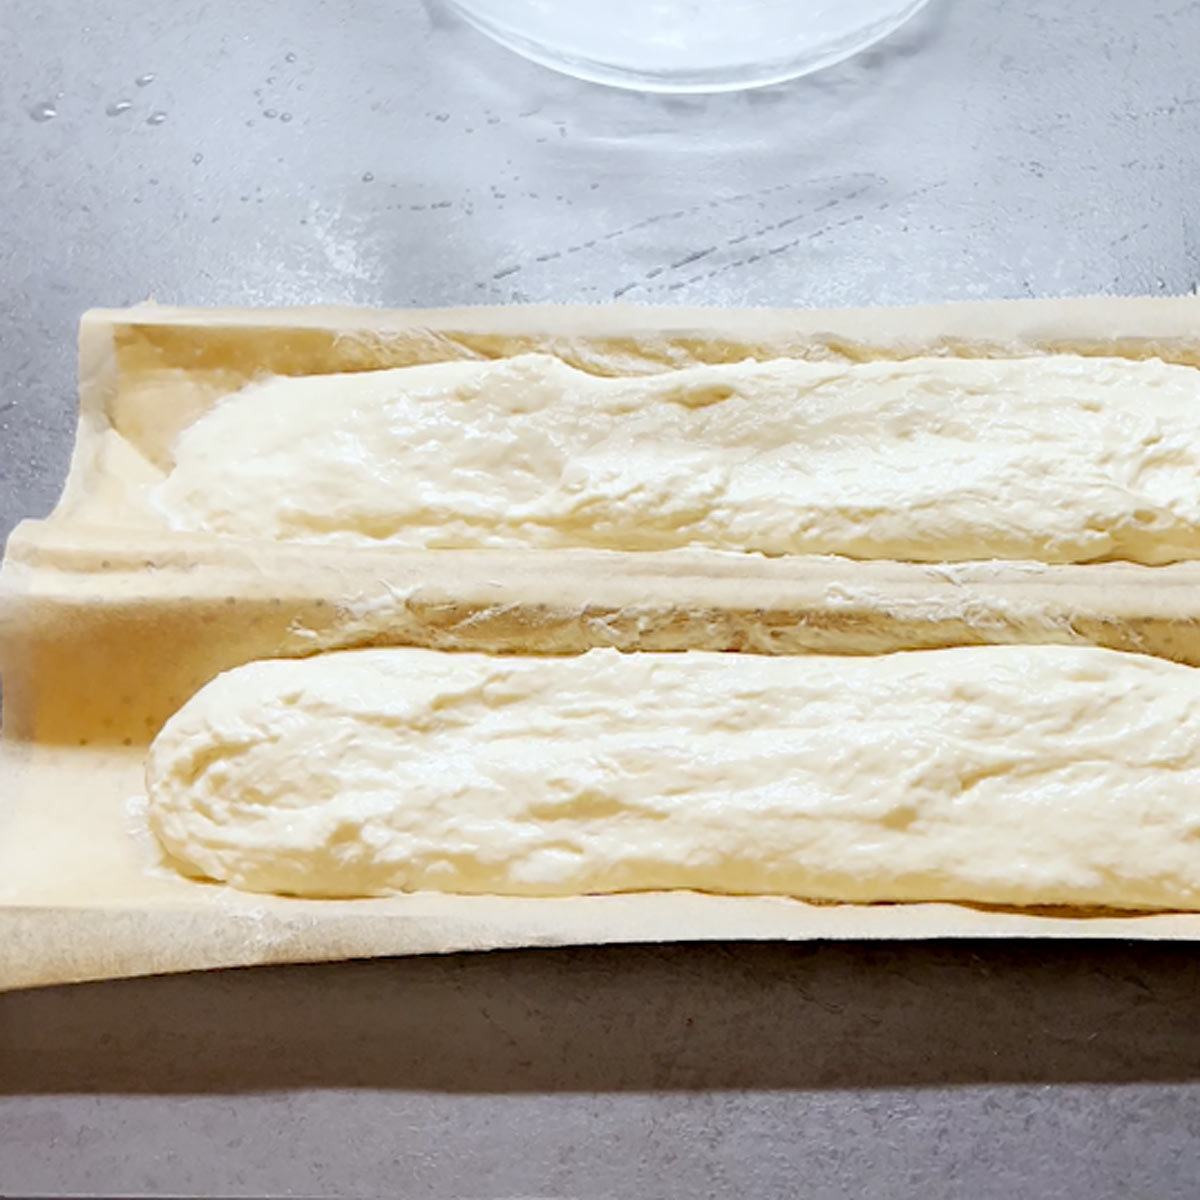 leave your baguette to rest and rise another 30 minutes